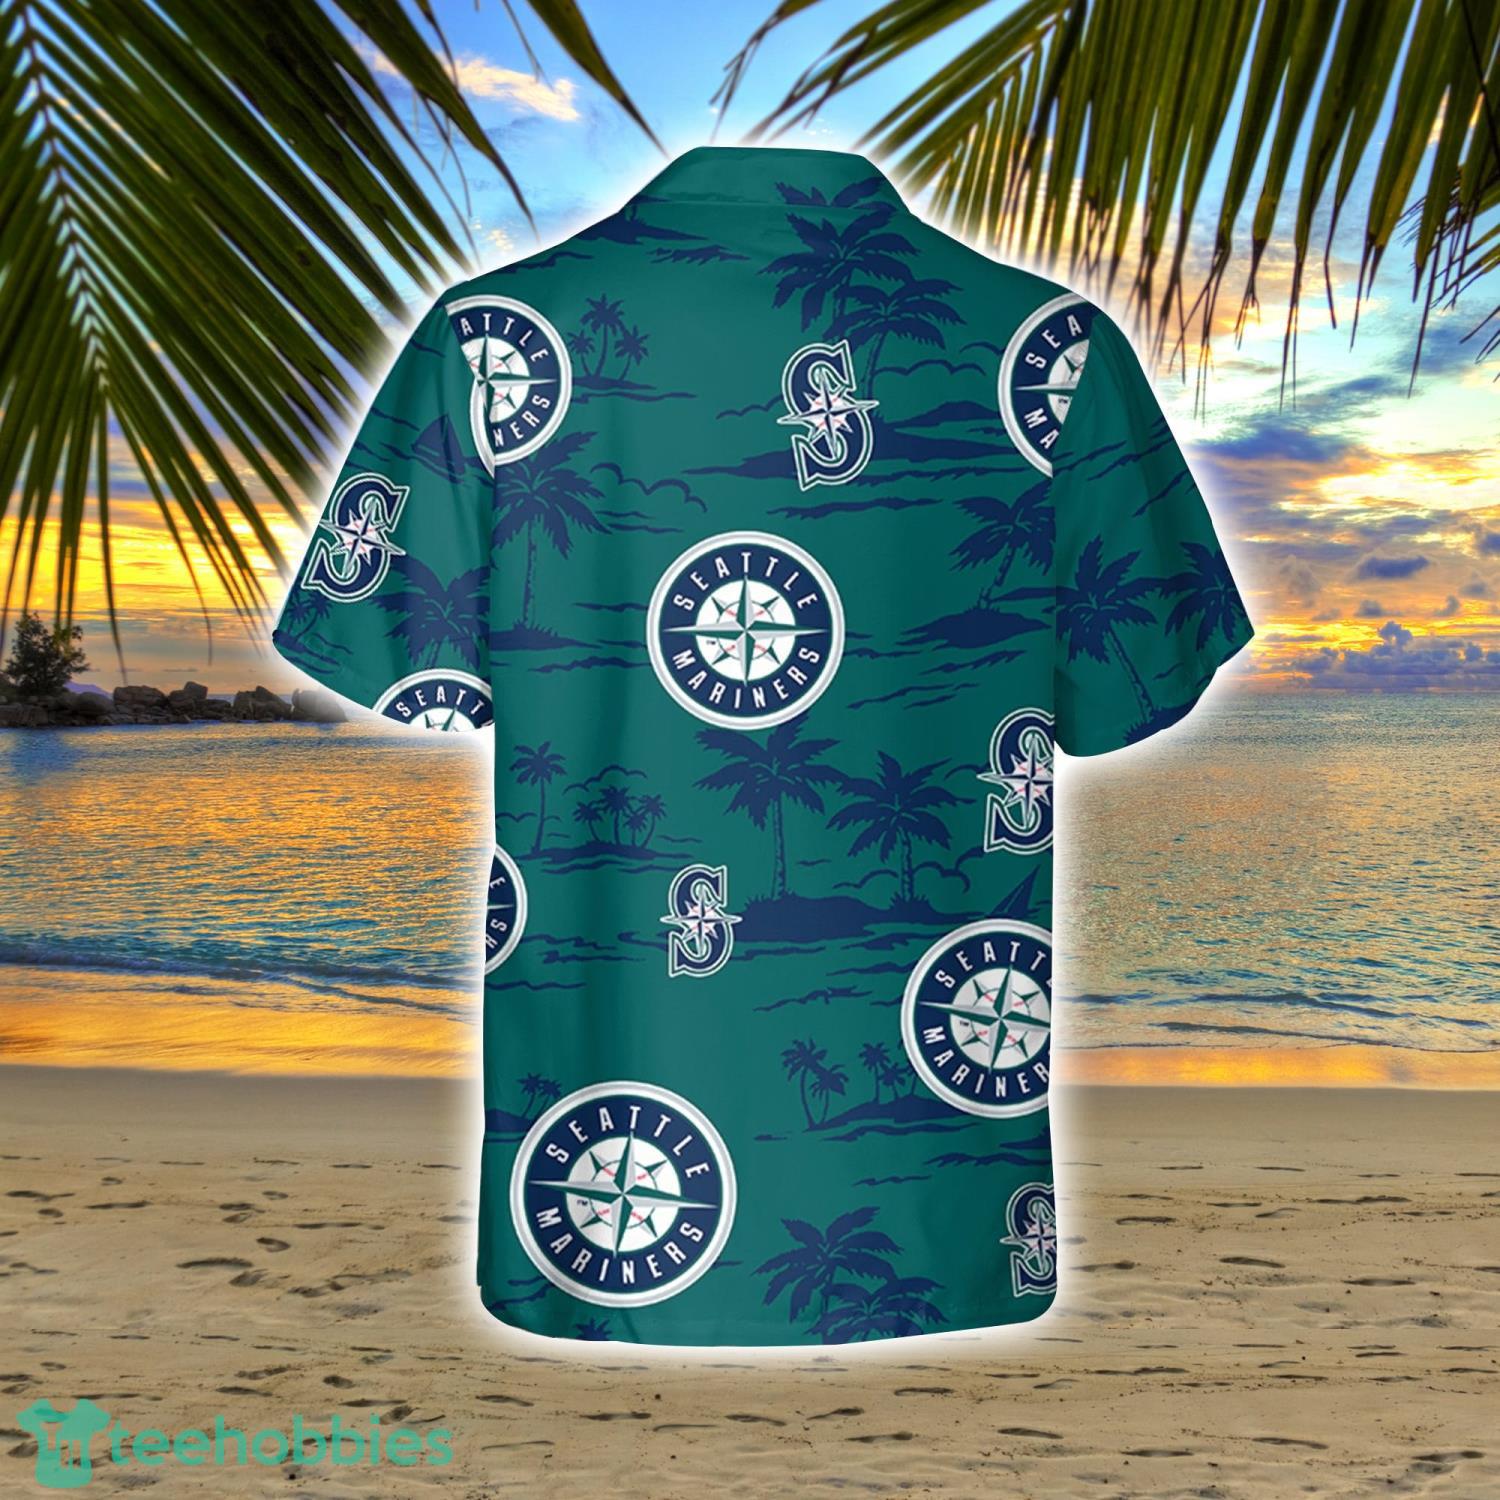 Seatle Mariners Good Vibes Only T Shirt, Custom prints store